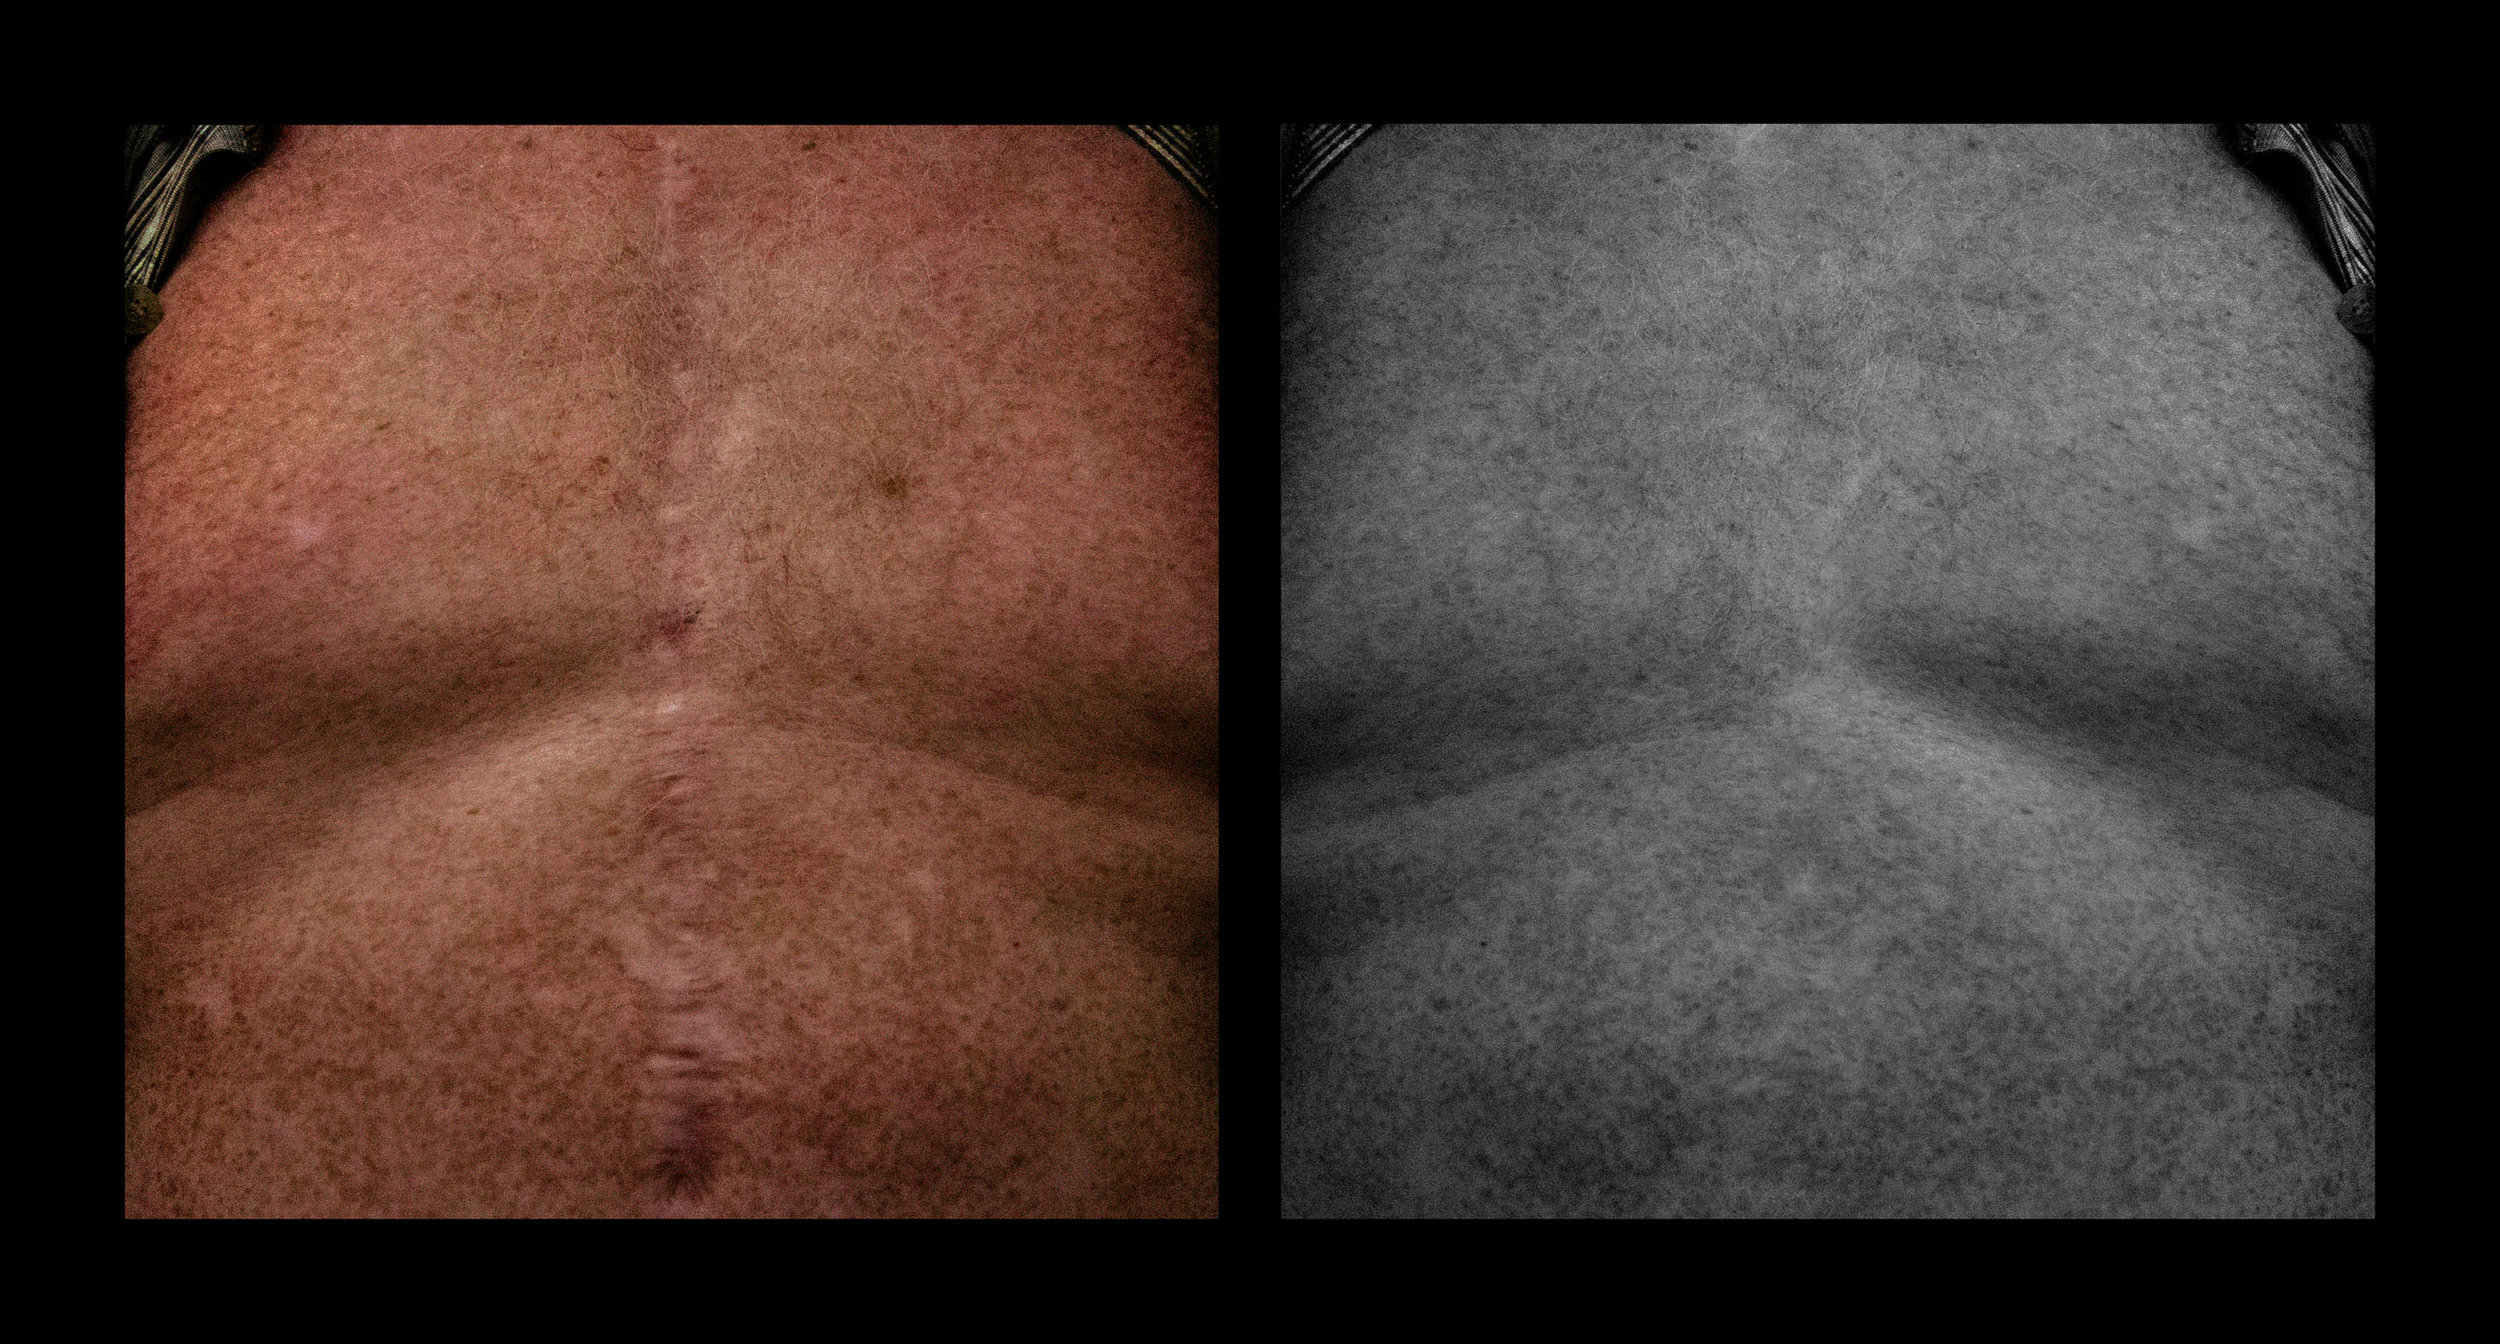  Comparative series on scars 